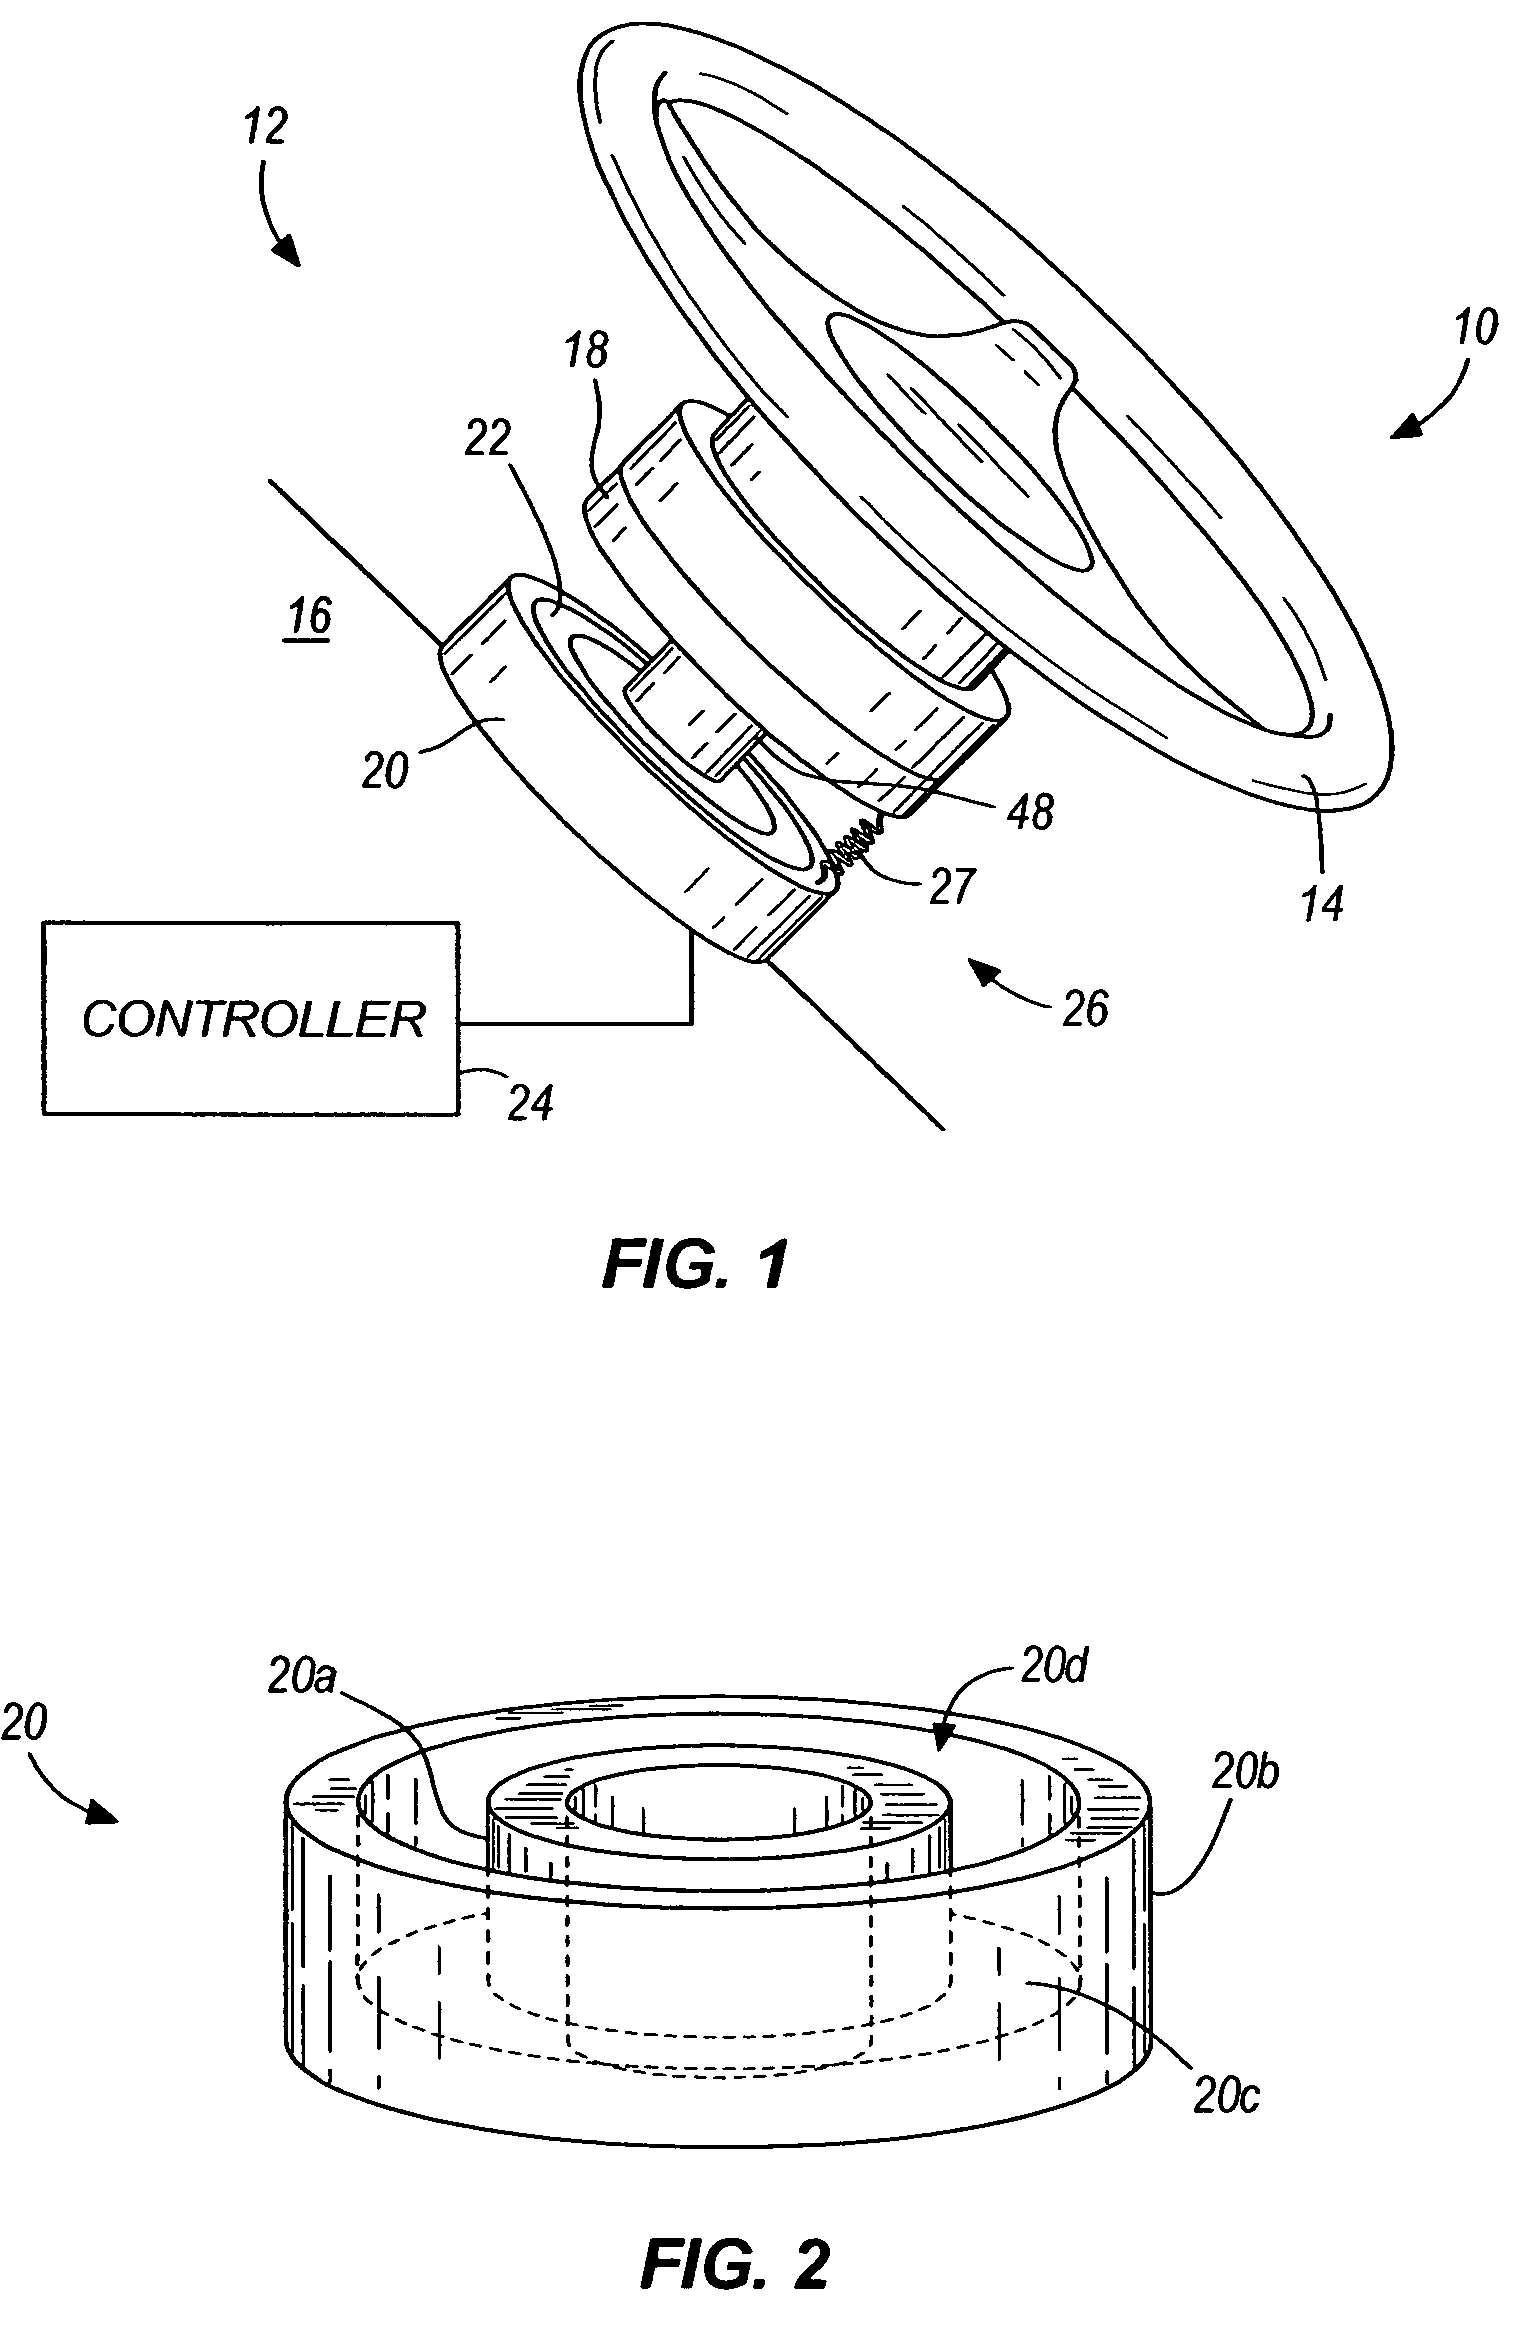 Residual magnetic devices and methods for an ignition actuation blockage device